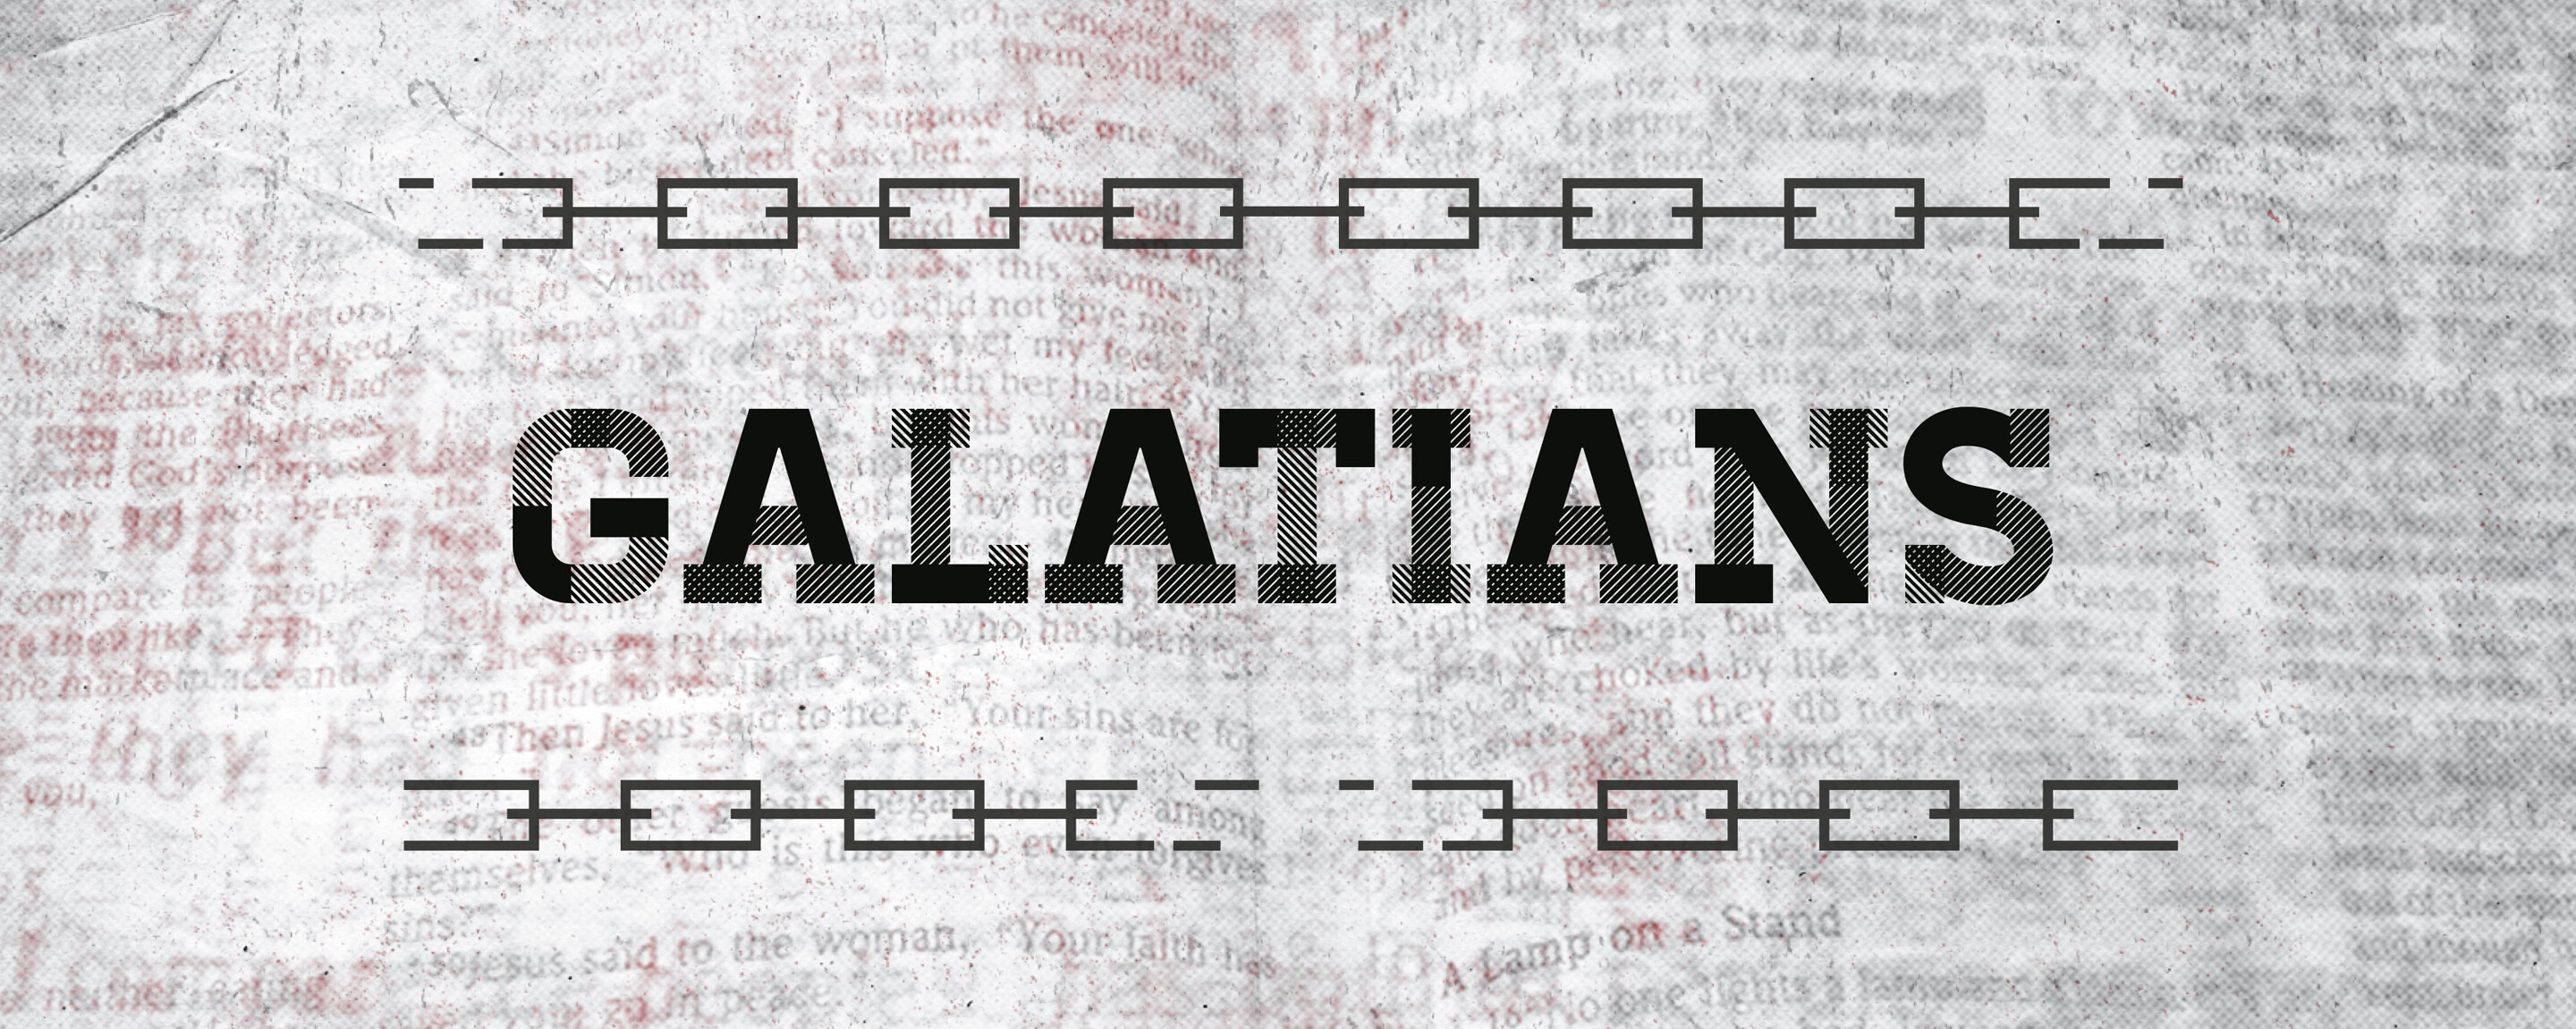 Galatians Pt. 3 | One Gospel for All People